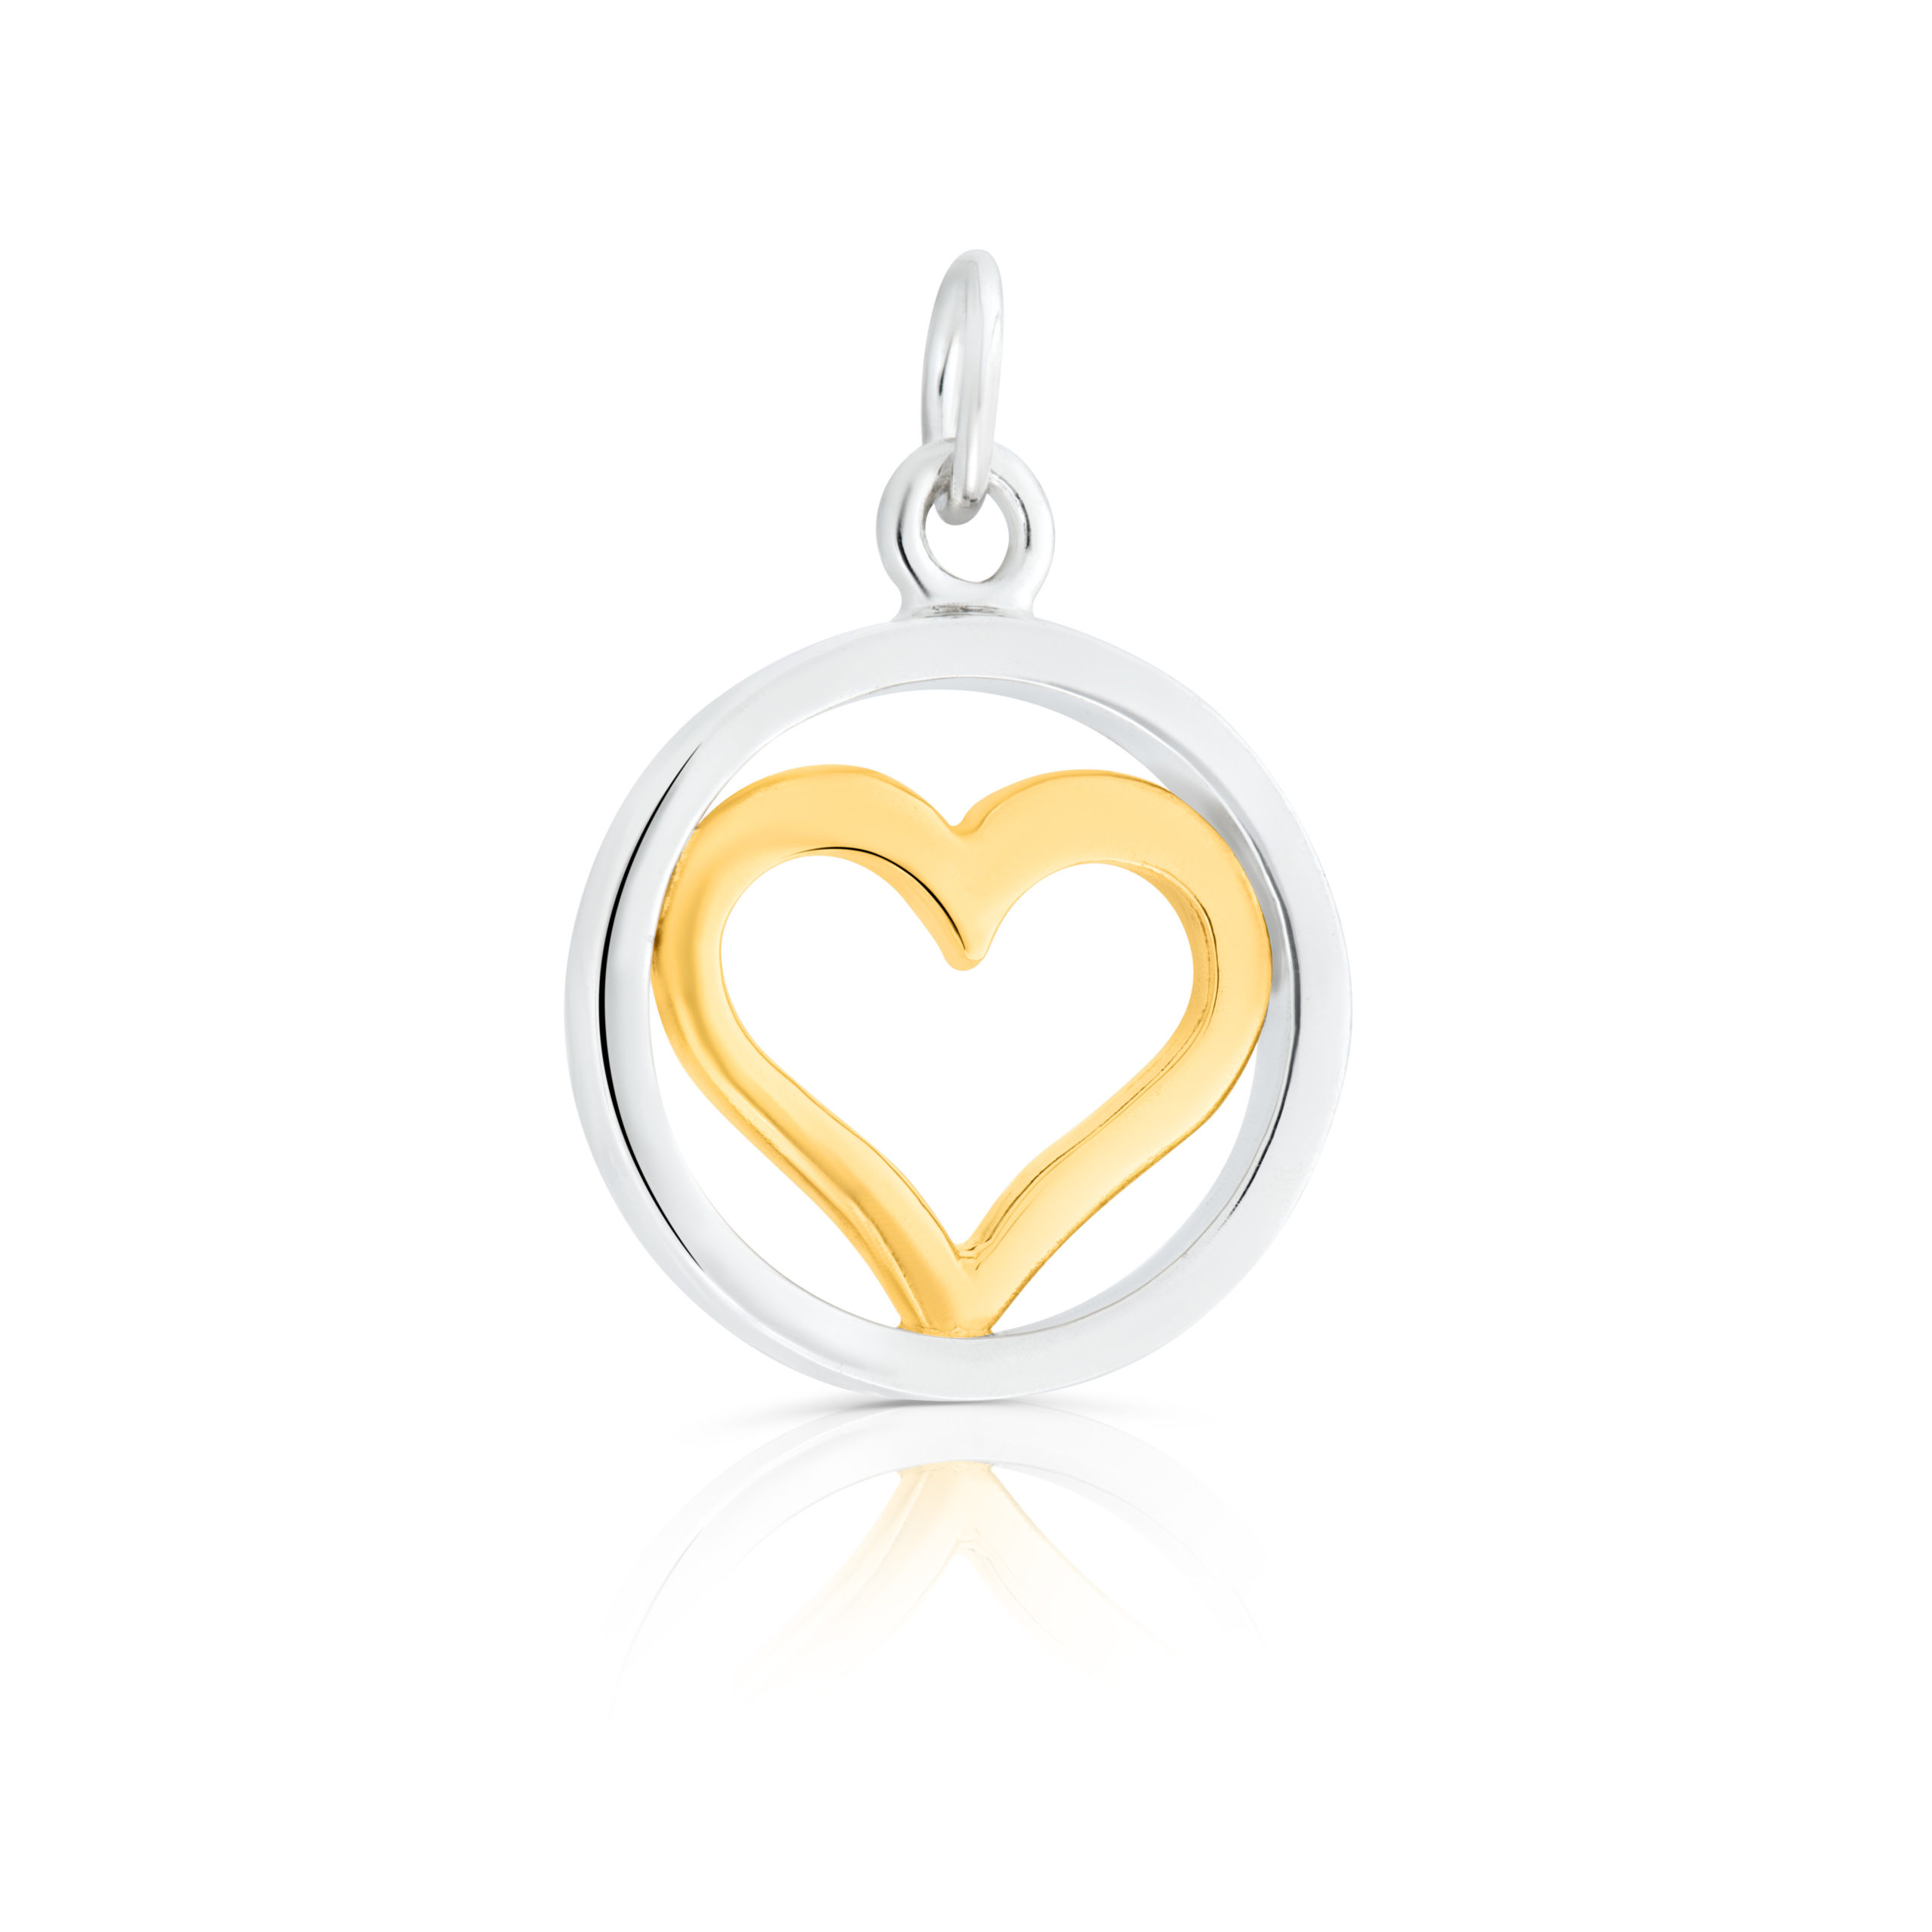 Sterling Silver & 9ct Yellow Gold Charm / Pendant (Guernsey Girl)